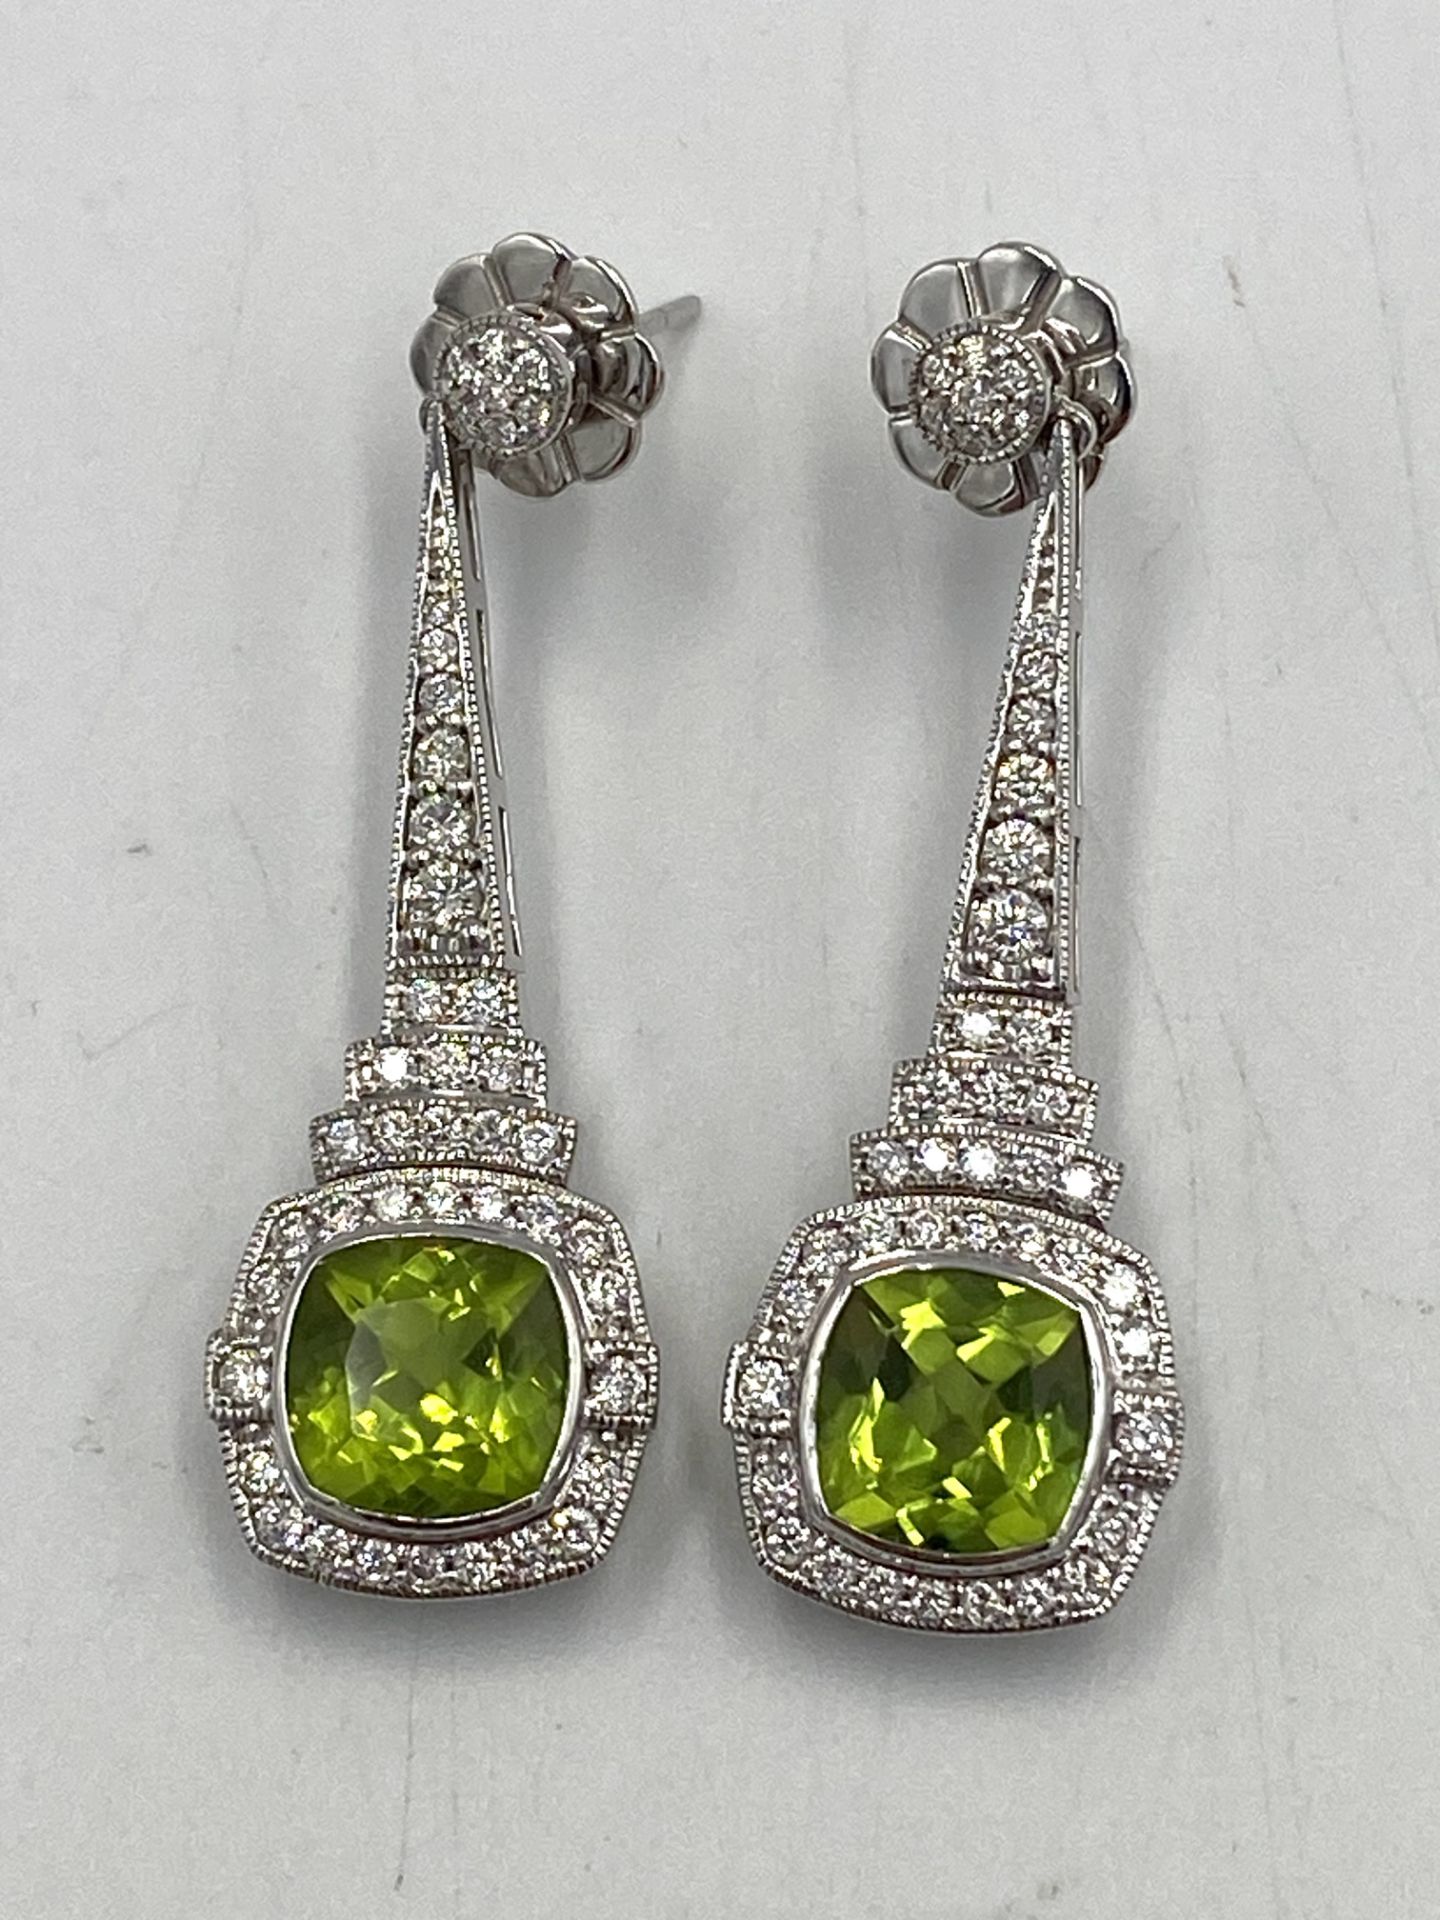 18ct diamond and green stone drop earrings - Image 4 of 4